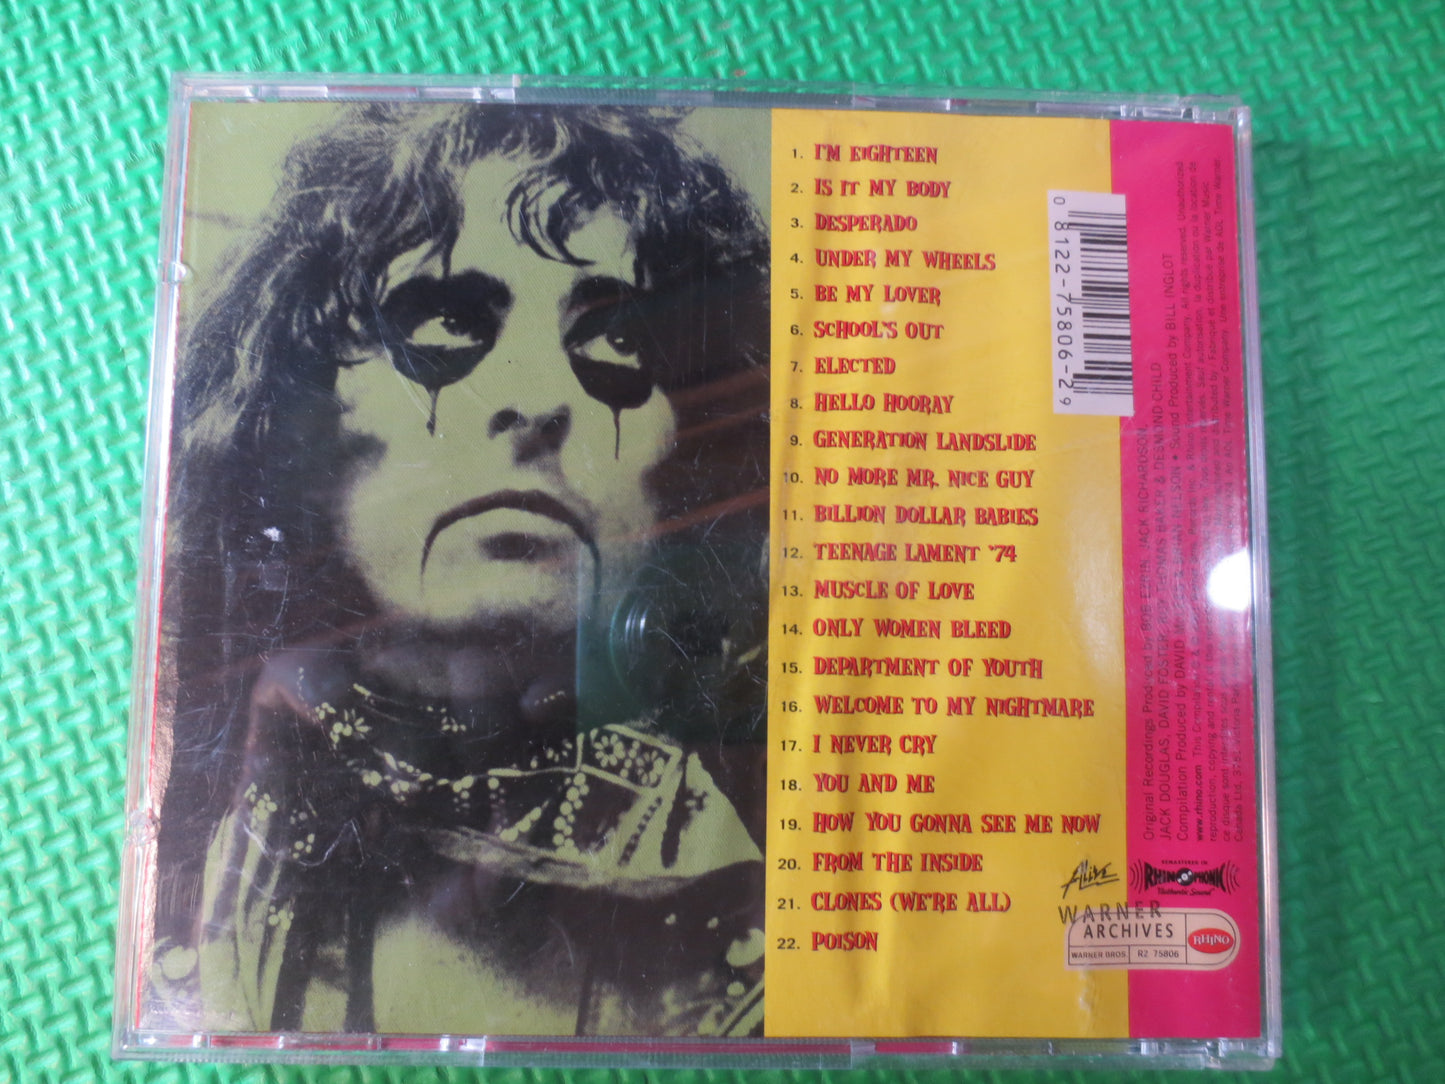 ALICE COOPER, MASCARA and Monsters, Alice Cooper Cd, Alice Cooper Lp, Music Cd, Rock Cd, Pop Music Cd, Rock Compact Disc